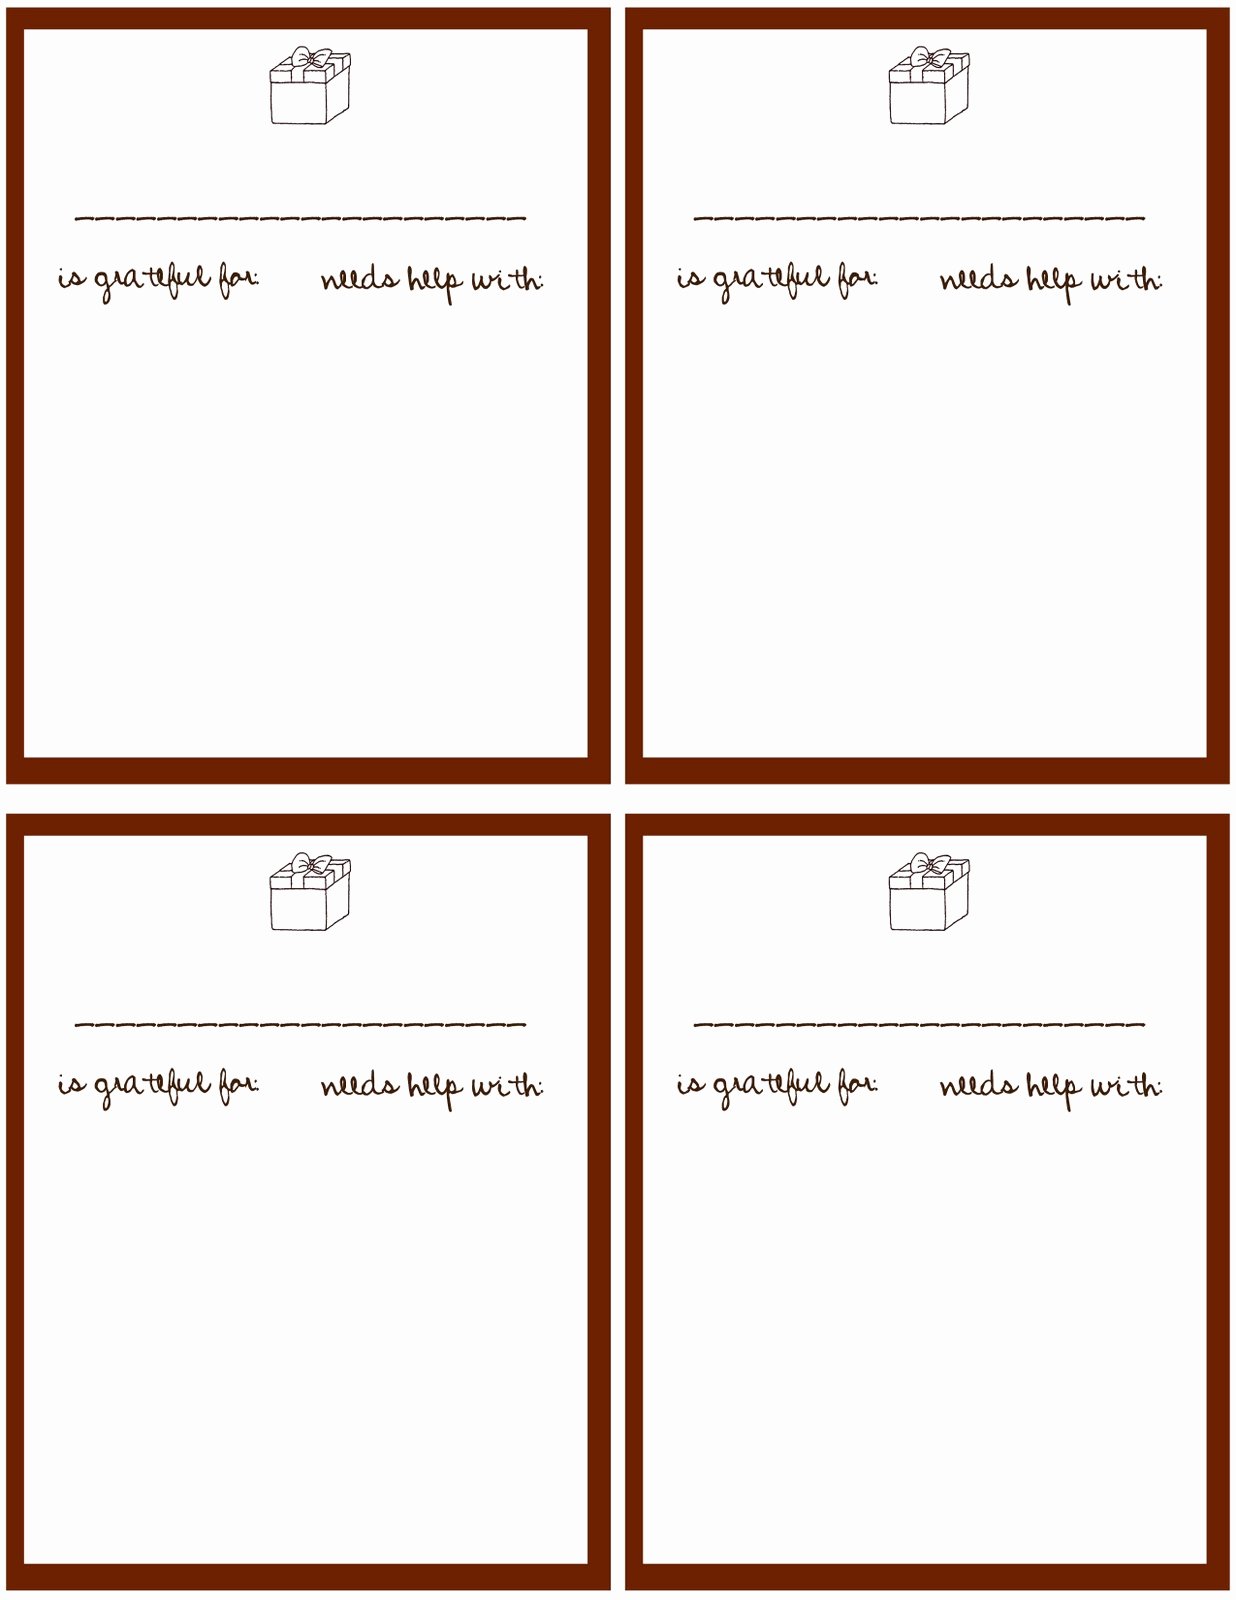 Prayer Cards Template New Amber S Notebook Daily Prayer Cards Printable